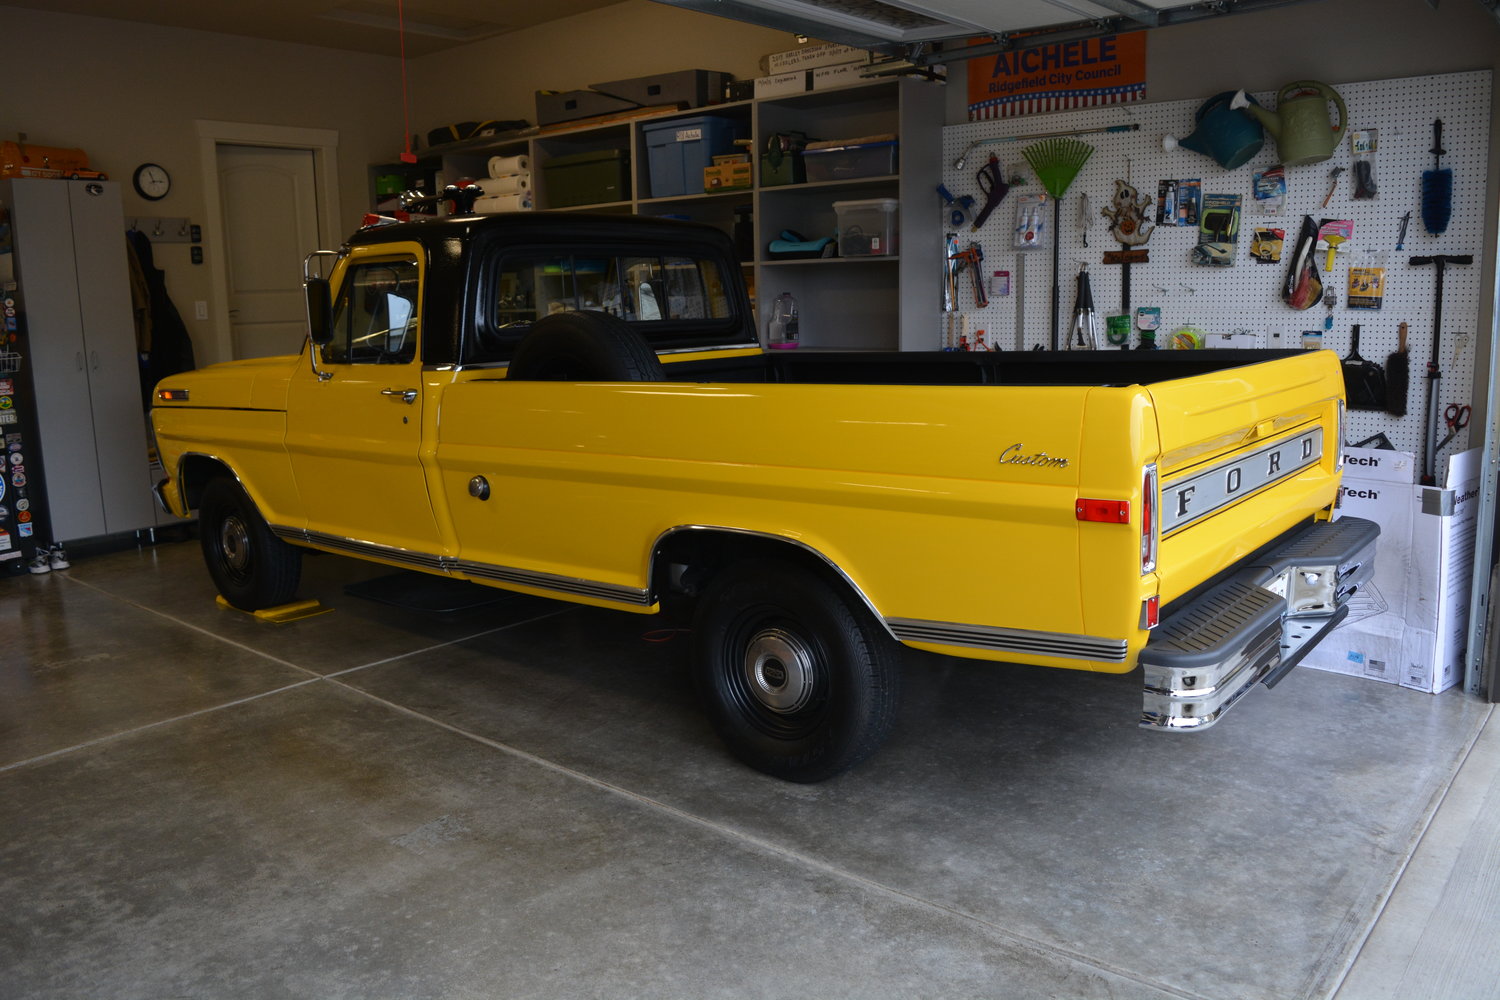 Rob Aichele said he chose a truck from the 1970s because he “loves everything from the 70s,” as it reminds him of his high school years, an influential time in his life.